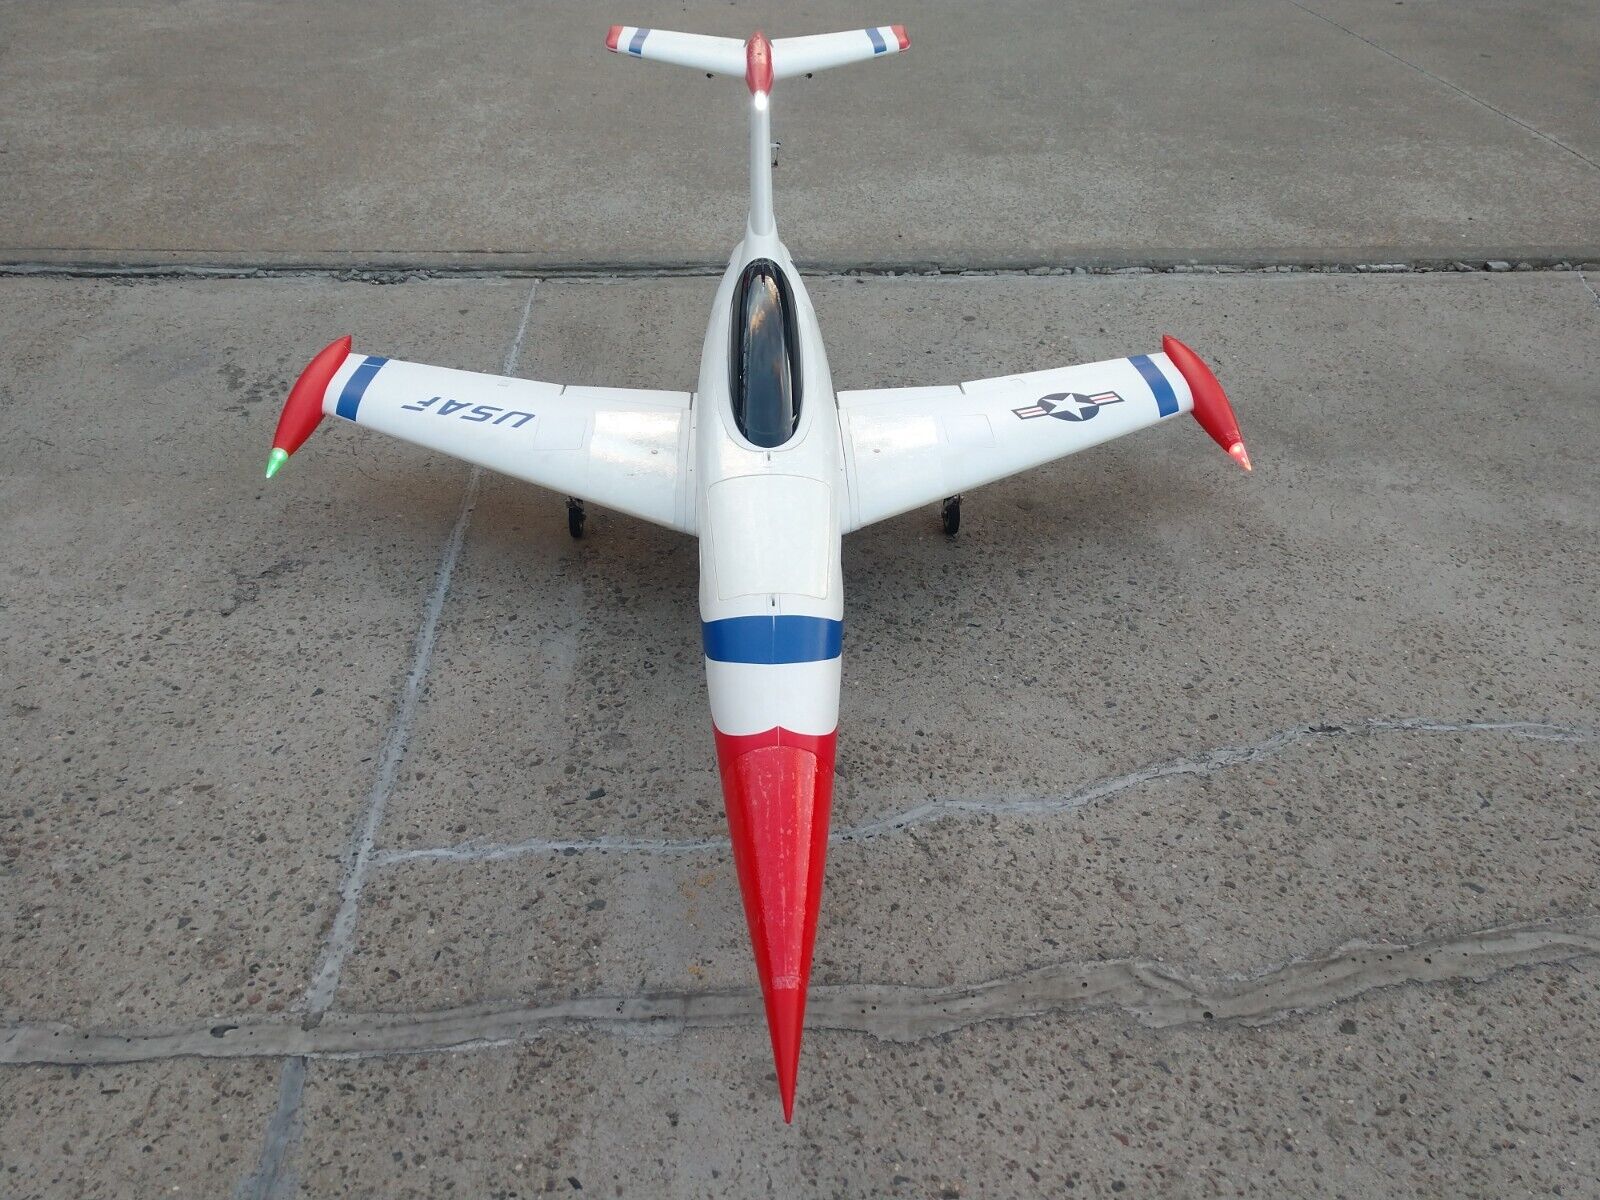 8 CH AF Model AeroFoam Diamond 105mm EDF Jet no ship to west , priced to sell